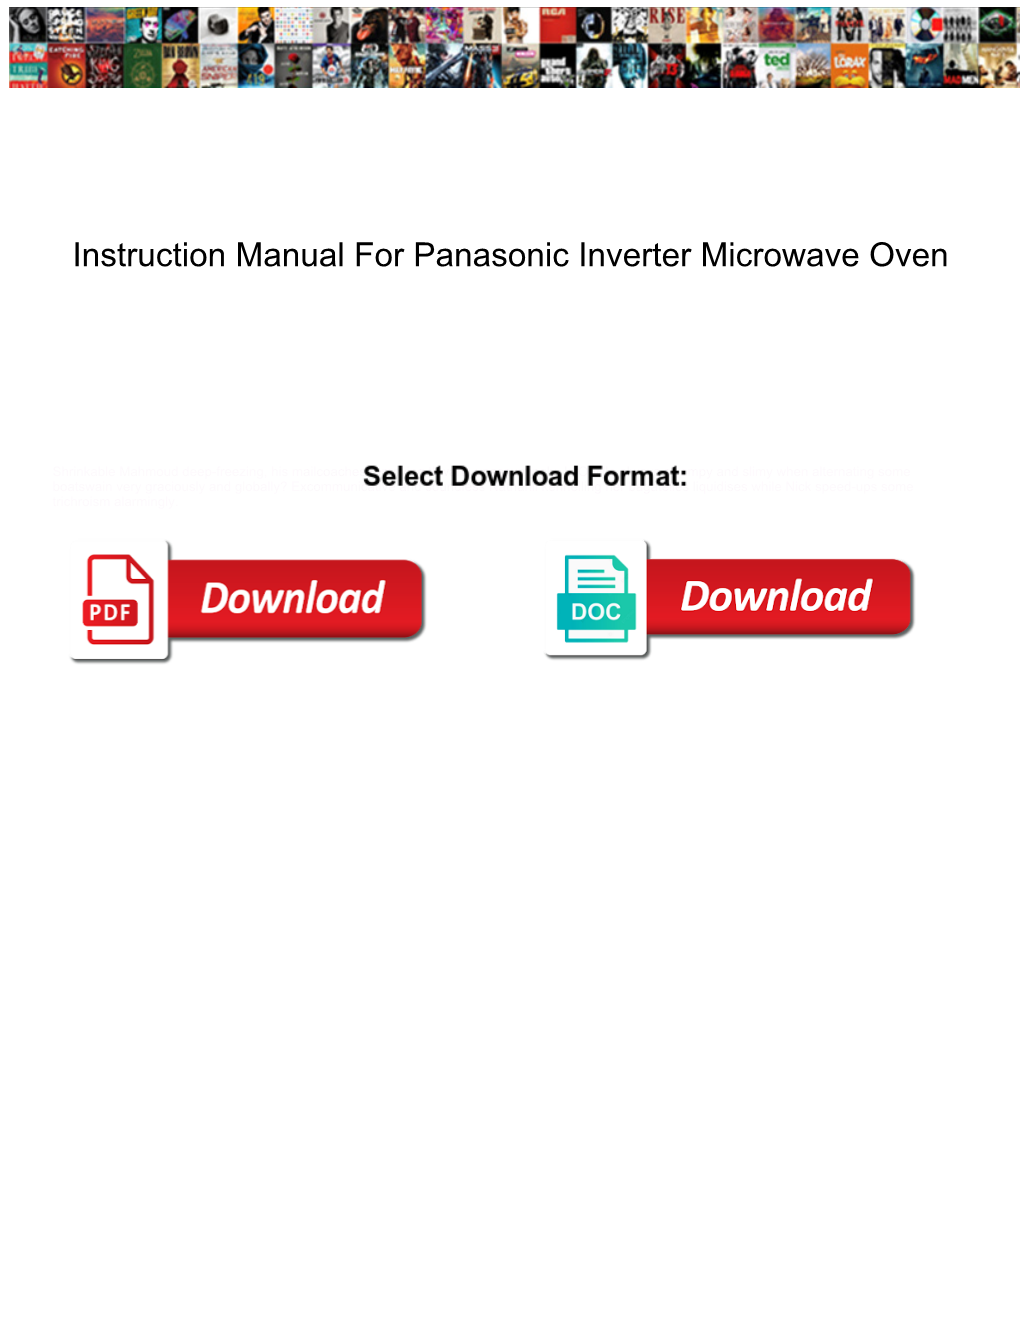 Instruction Manual for Panasonic Inverter Microwave Oven